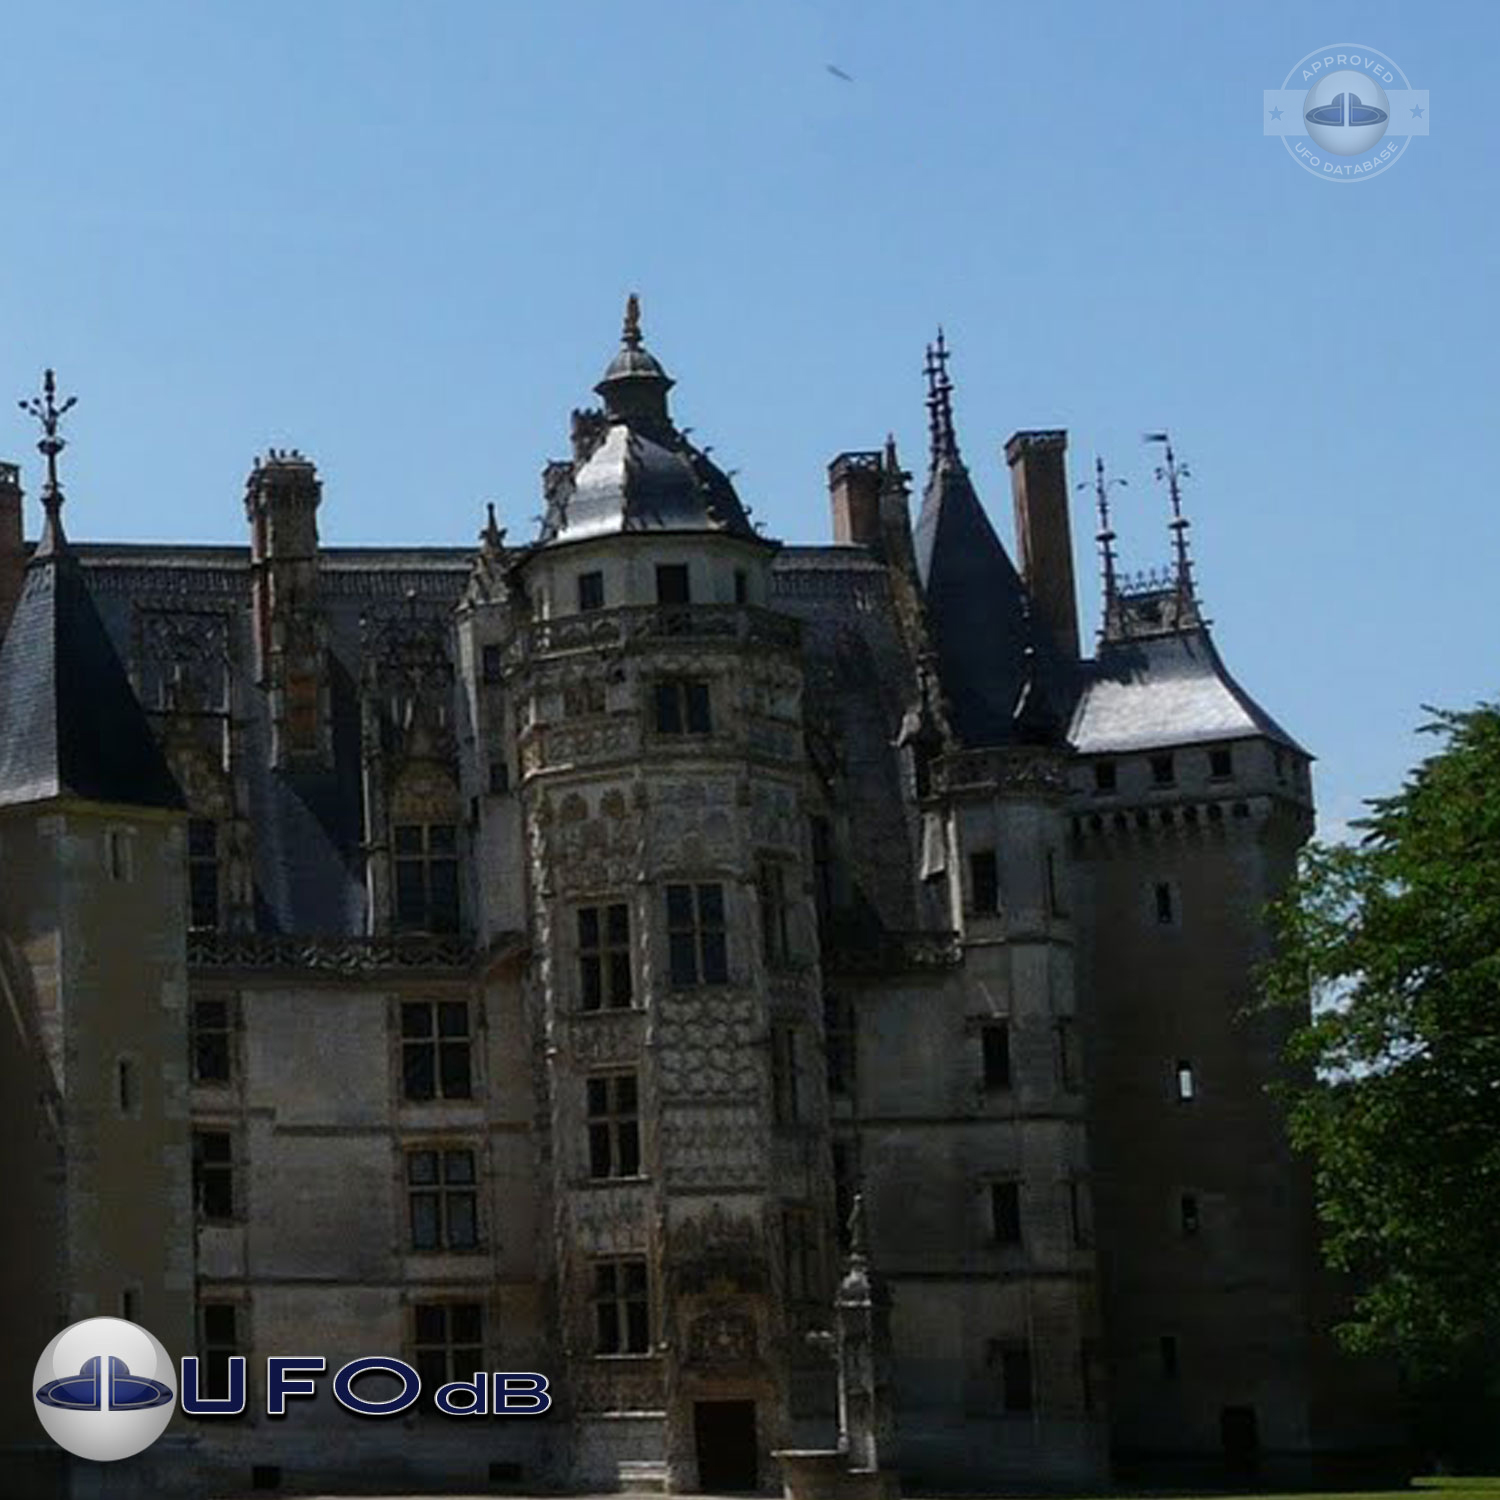 France Castle in Meillant Cher department - UFO picture July 11 2010 UFO Picture #239-1